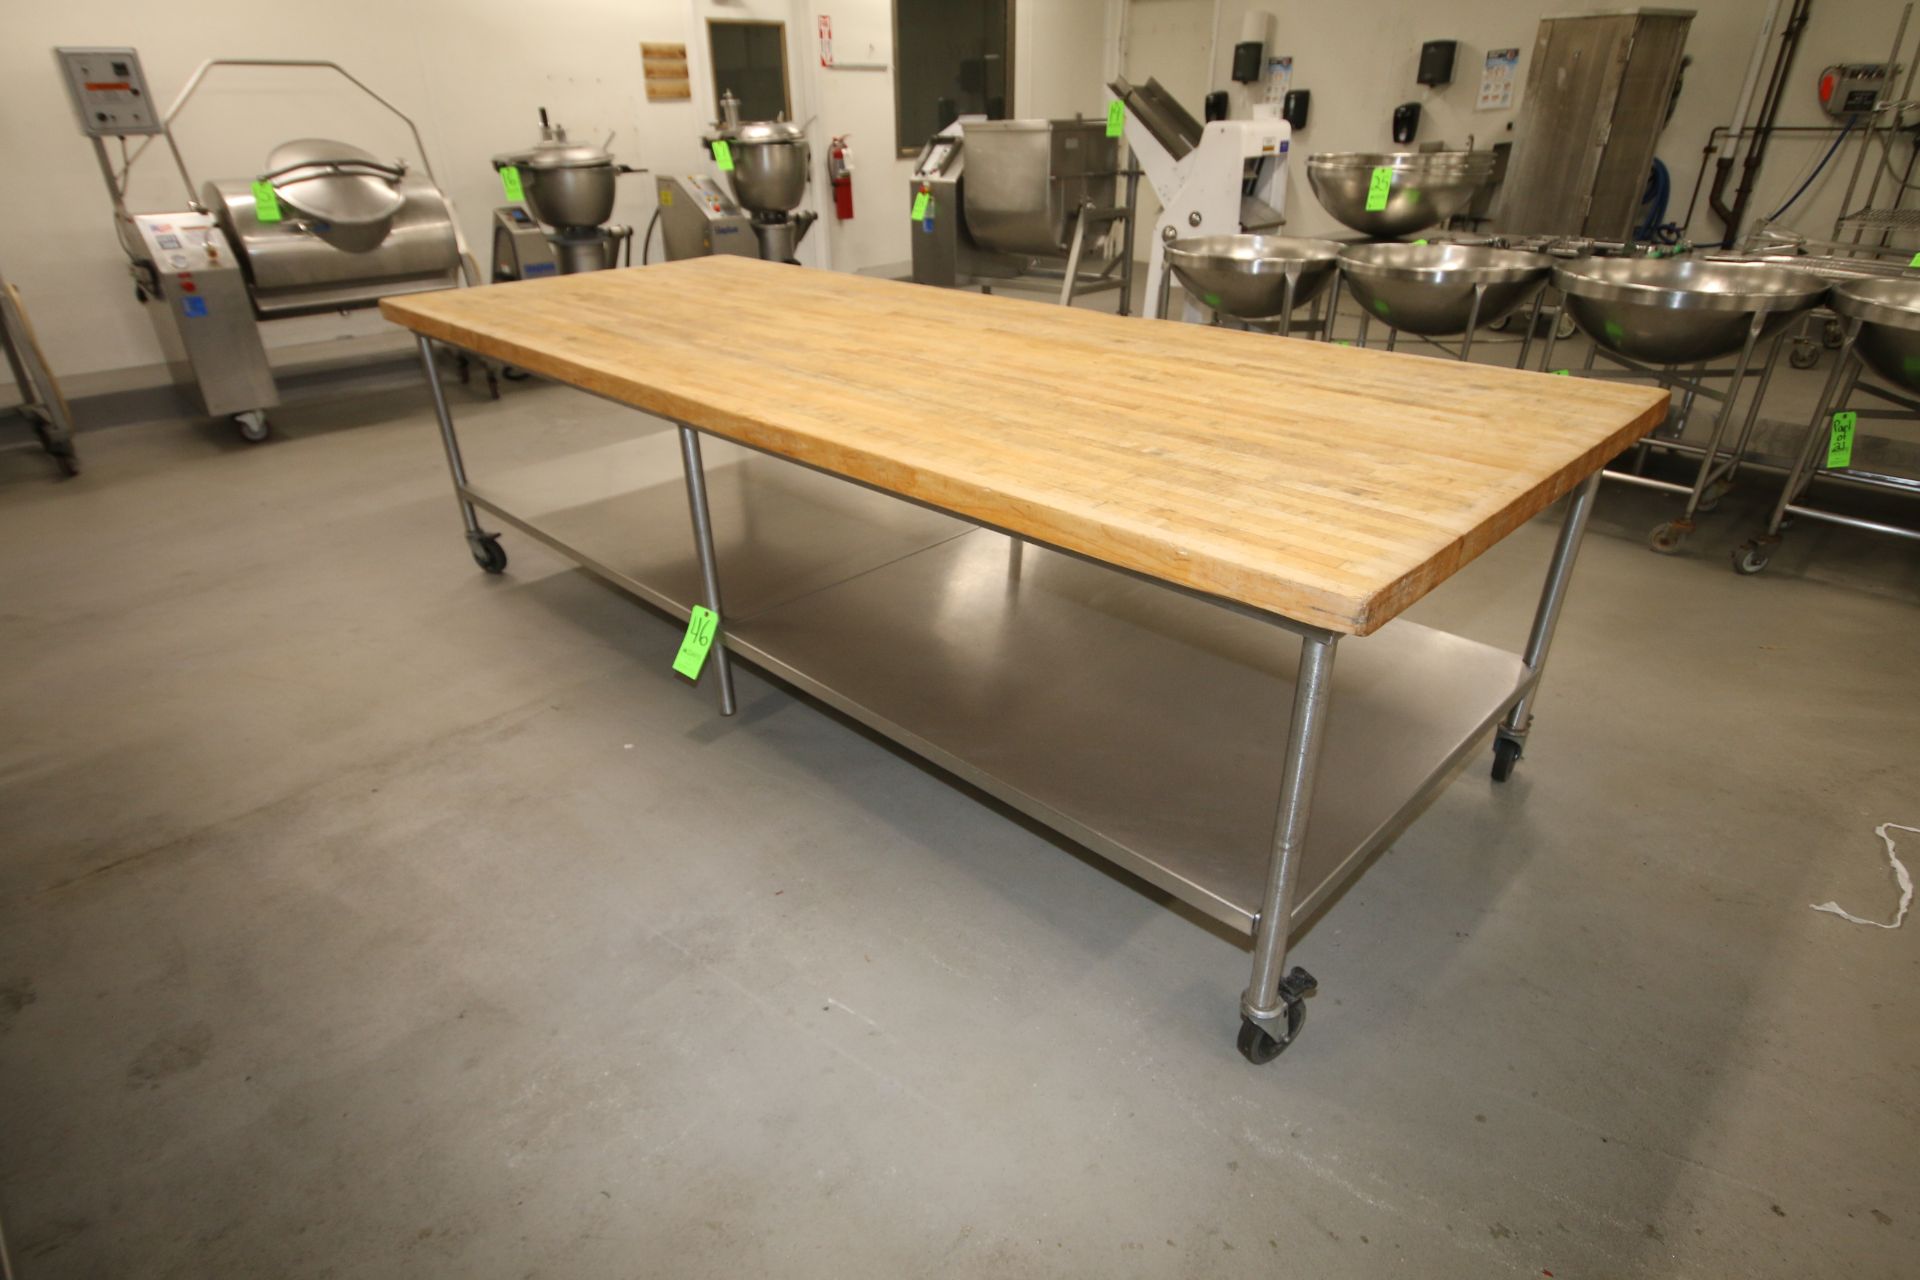 Butcher Block Top Portable Table, with S/S Bottom Shelf, Top Dims.: Aprox. 10' x 4'